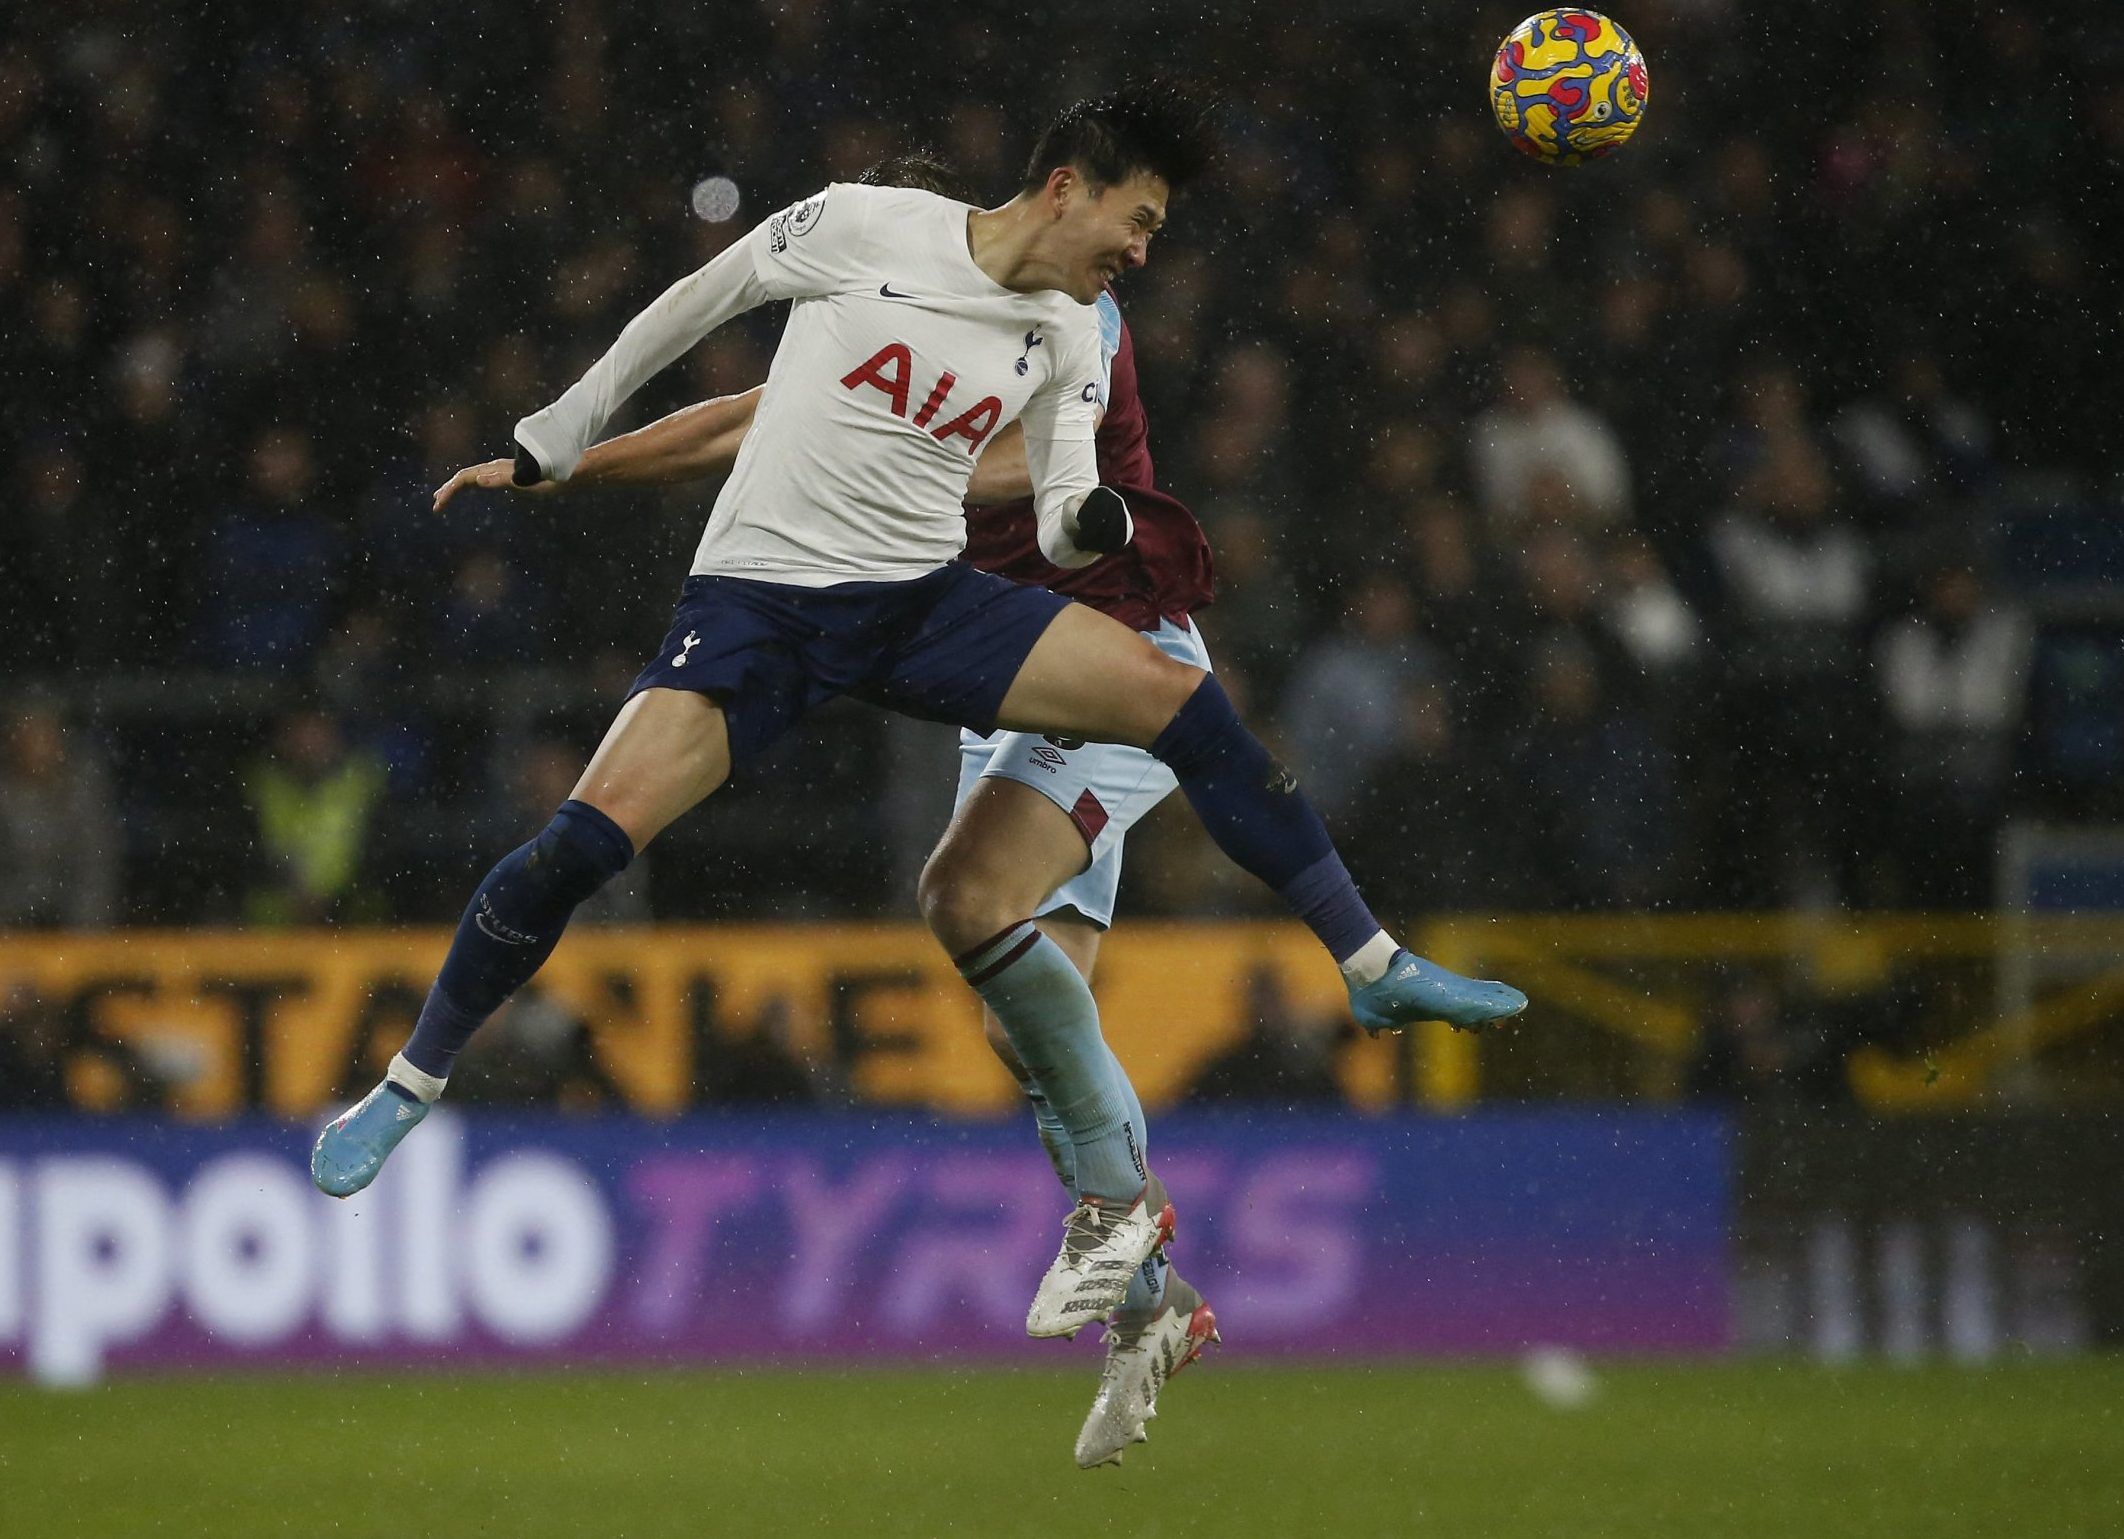 Tottenham Hotspur attacker Heung-min Son in action against Burnley in the Premier League